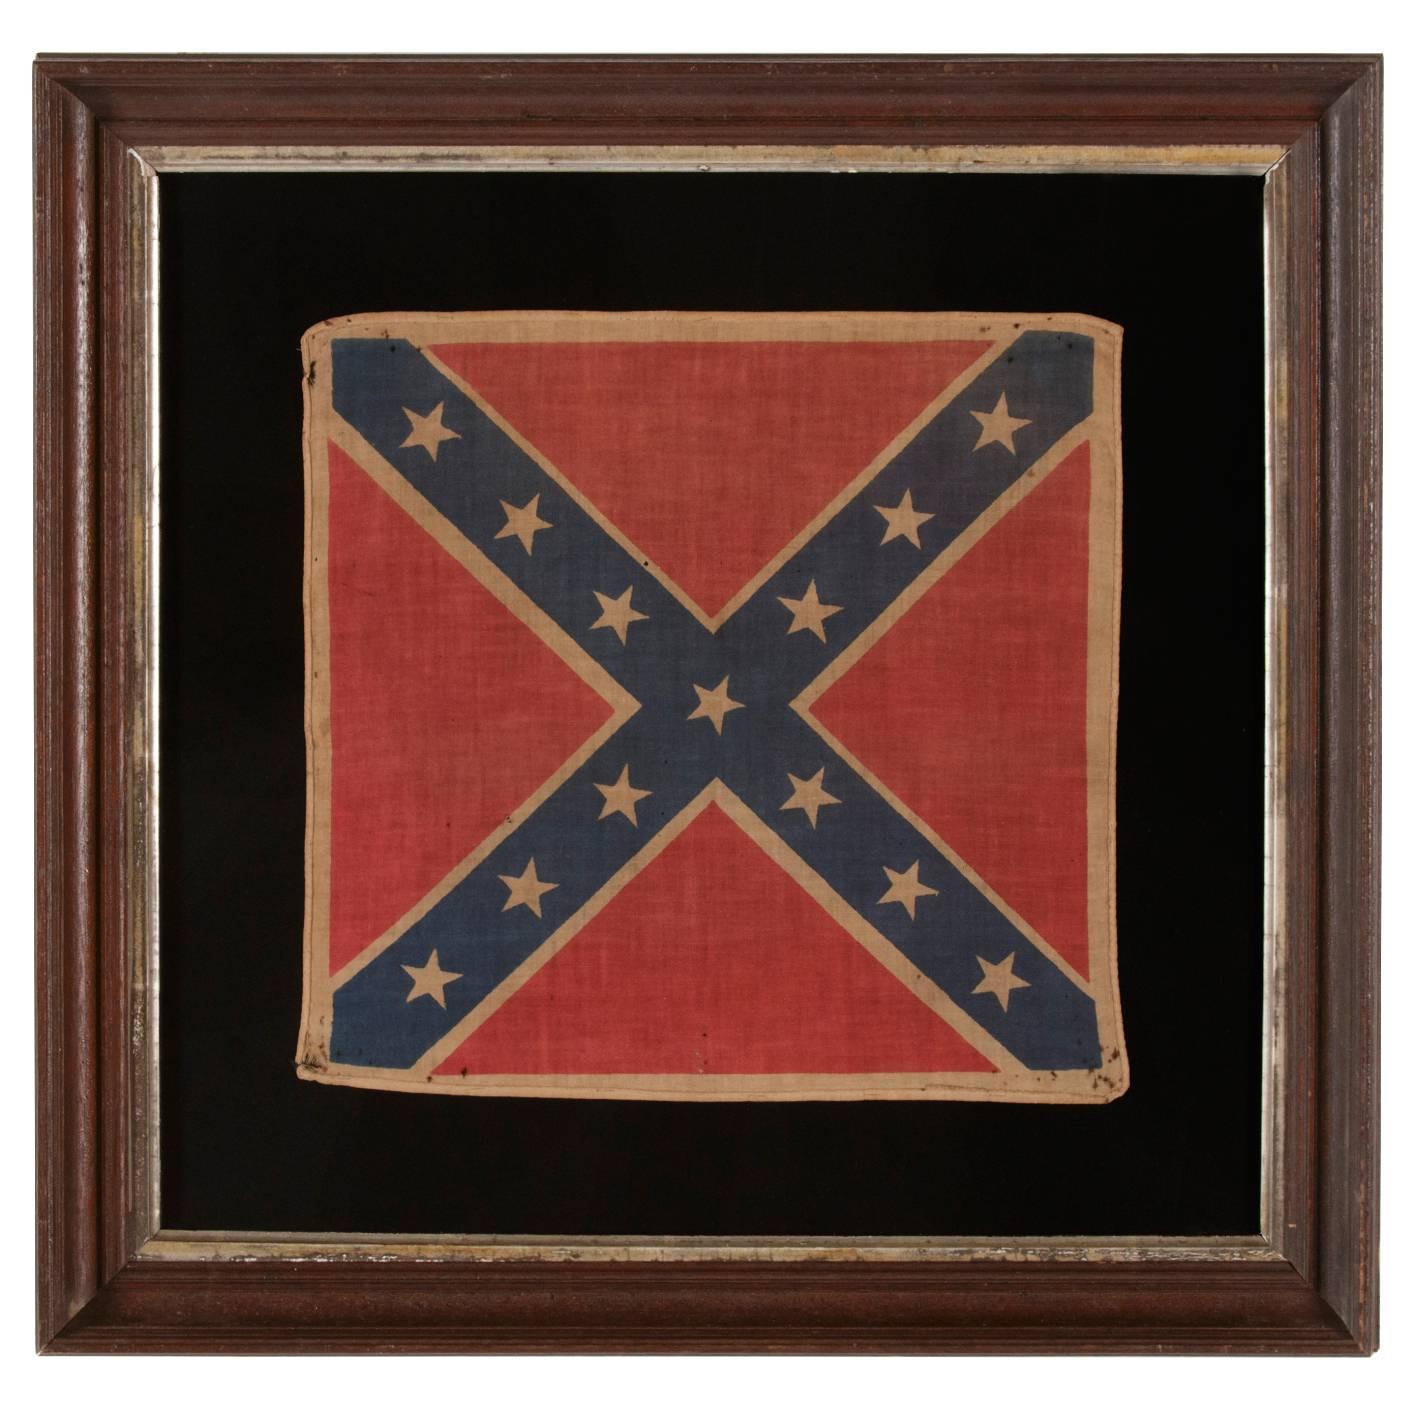 Confederate Parade Flag in the Southern Cross Battle Flag Format